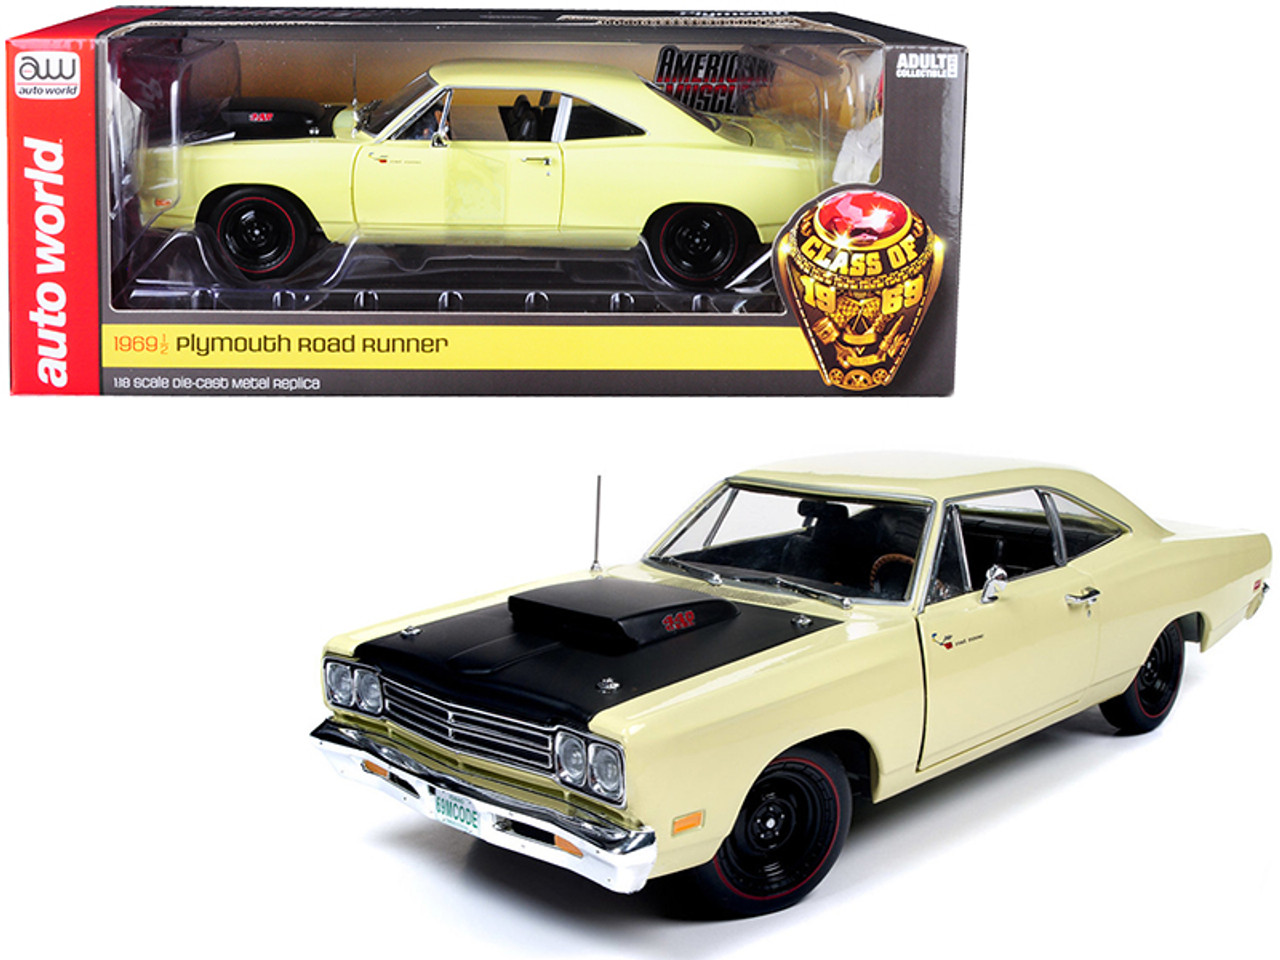 1969/5 Plymouth Road Runner Coupe Sunfire Yellow with Black Hood "Looney Tunes" "Class of 1969" Special Limited Edition 1/18 Diecast Model Car by Autoworld